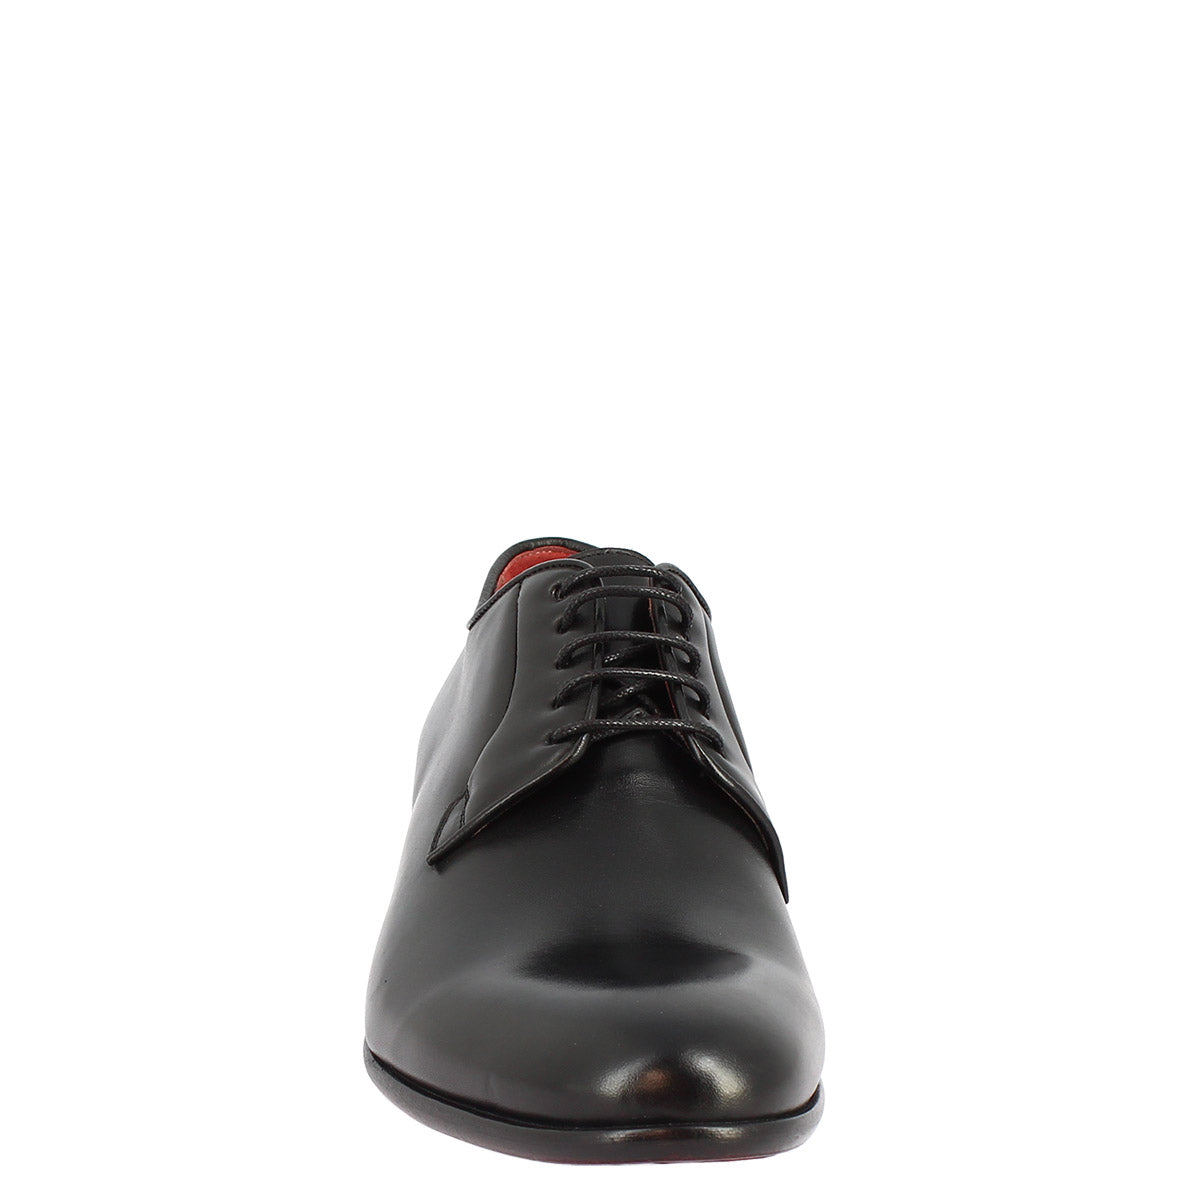 Men's handmade lace-up shoes in black leather